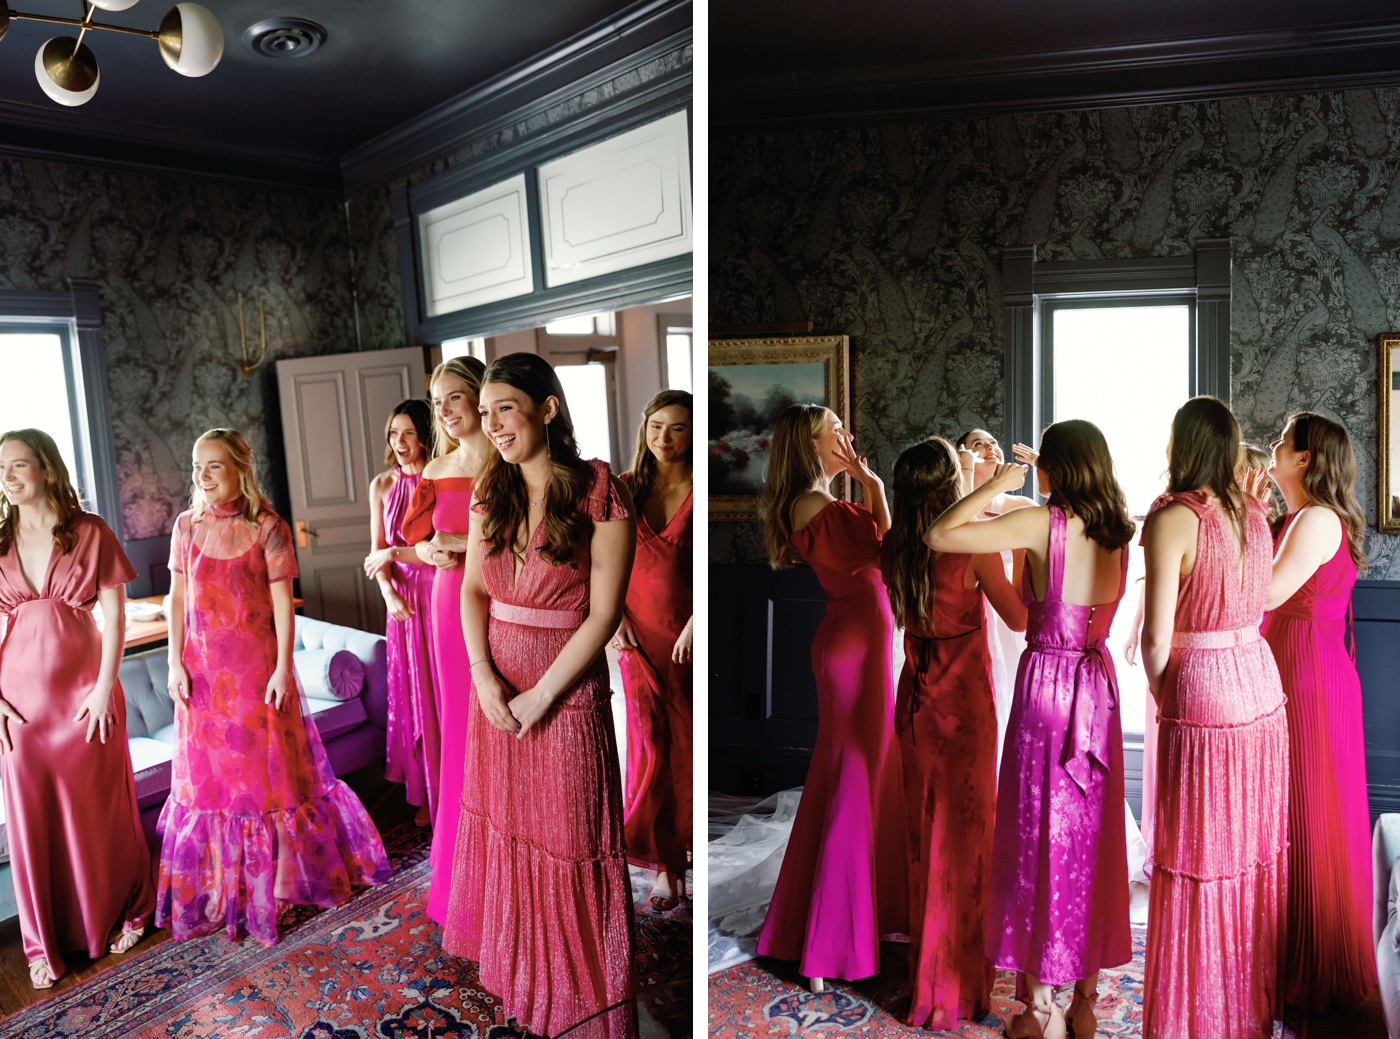 Bridesmaids in fuchsia and pink dresses, seeing the bride for the first time